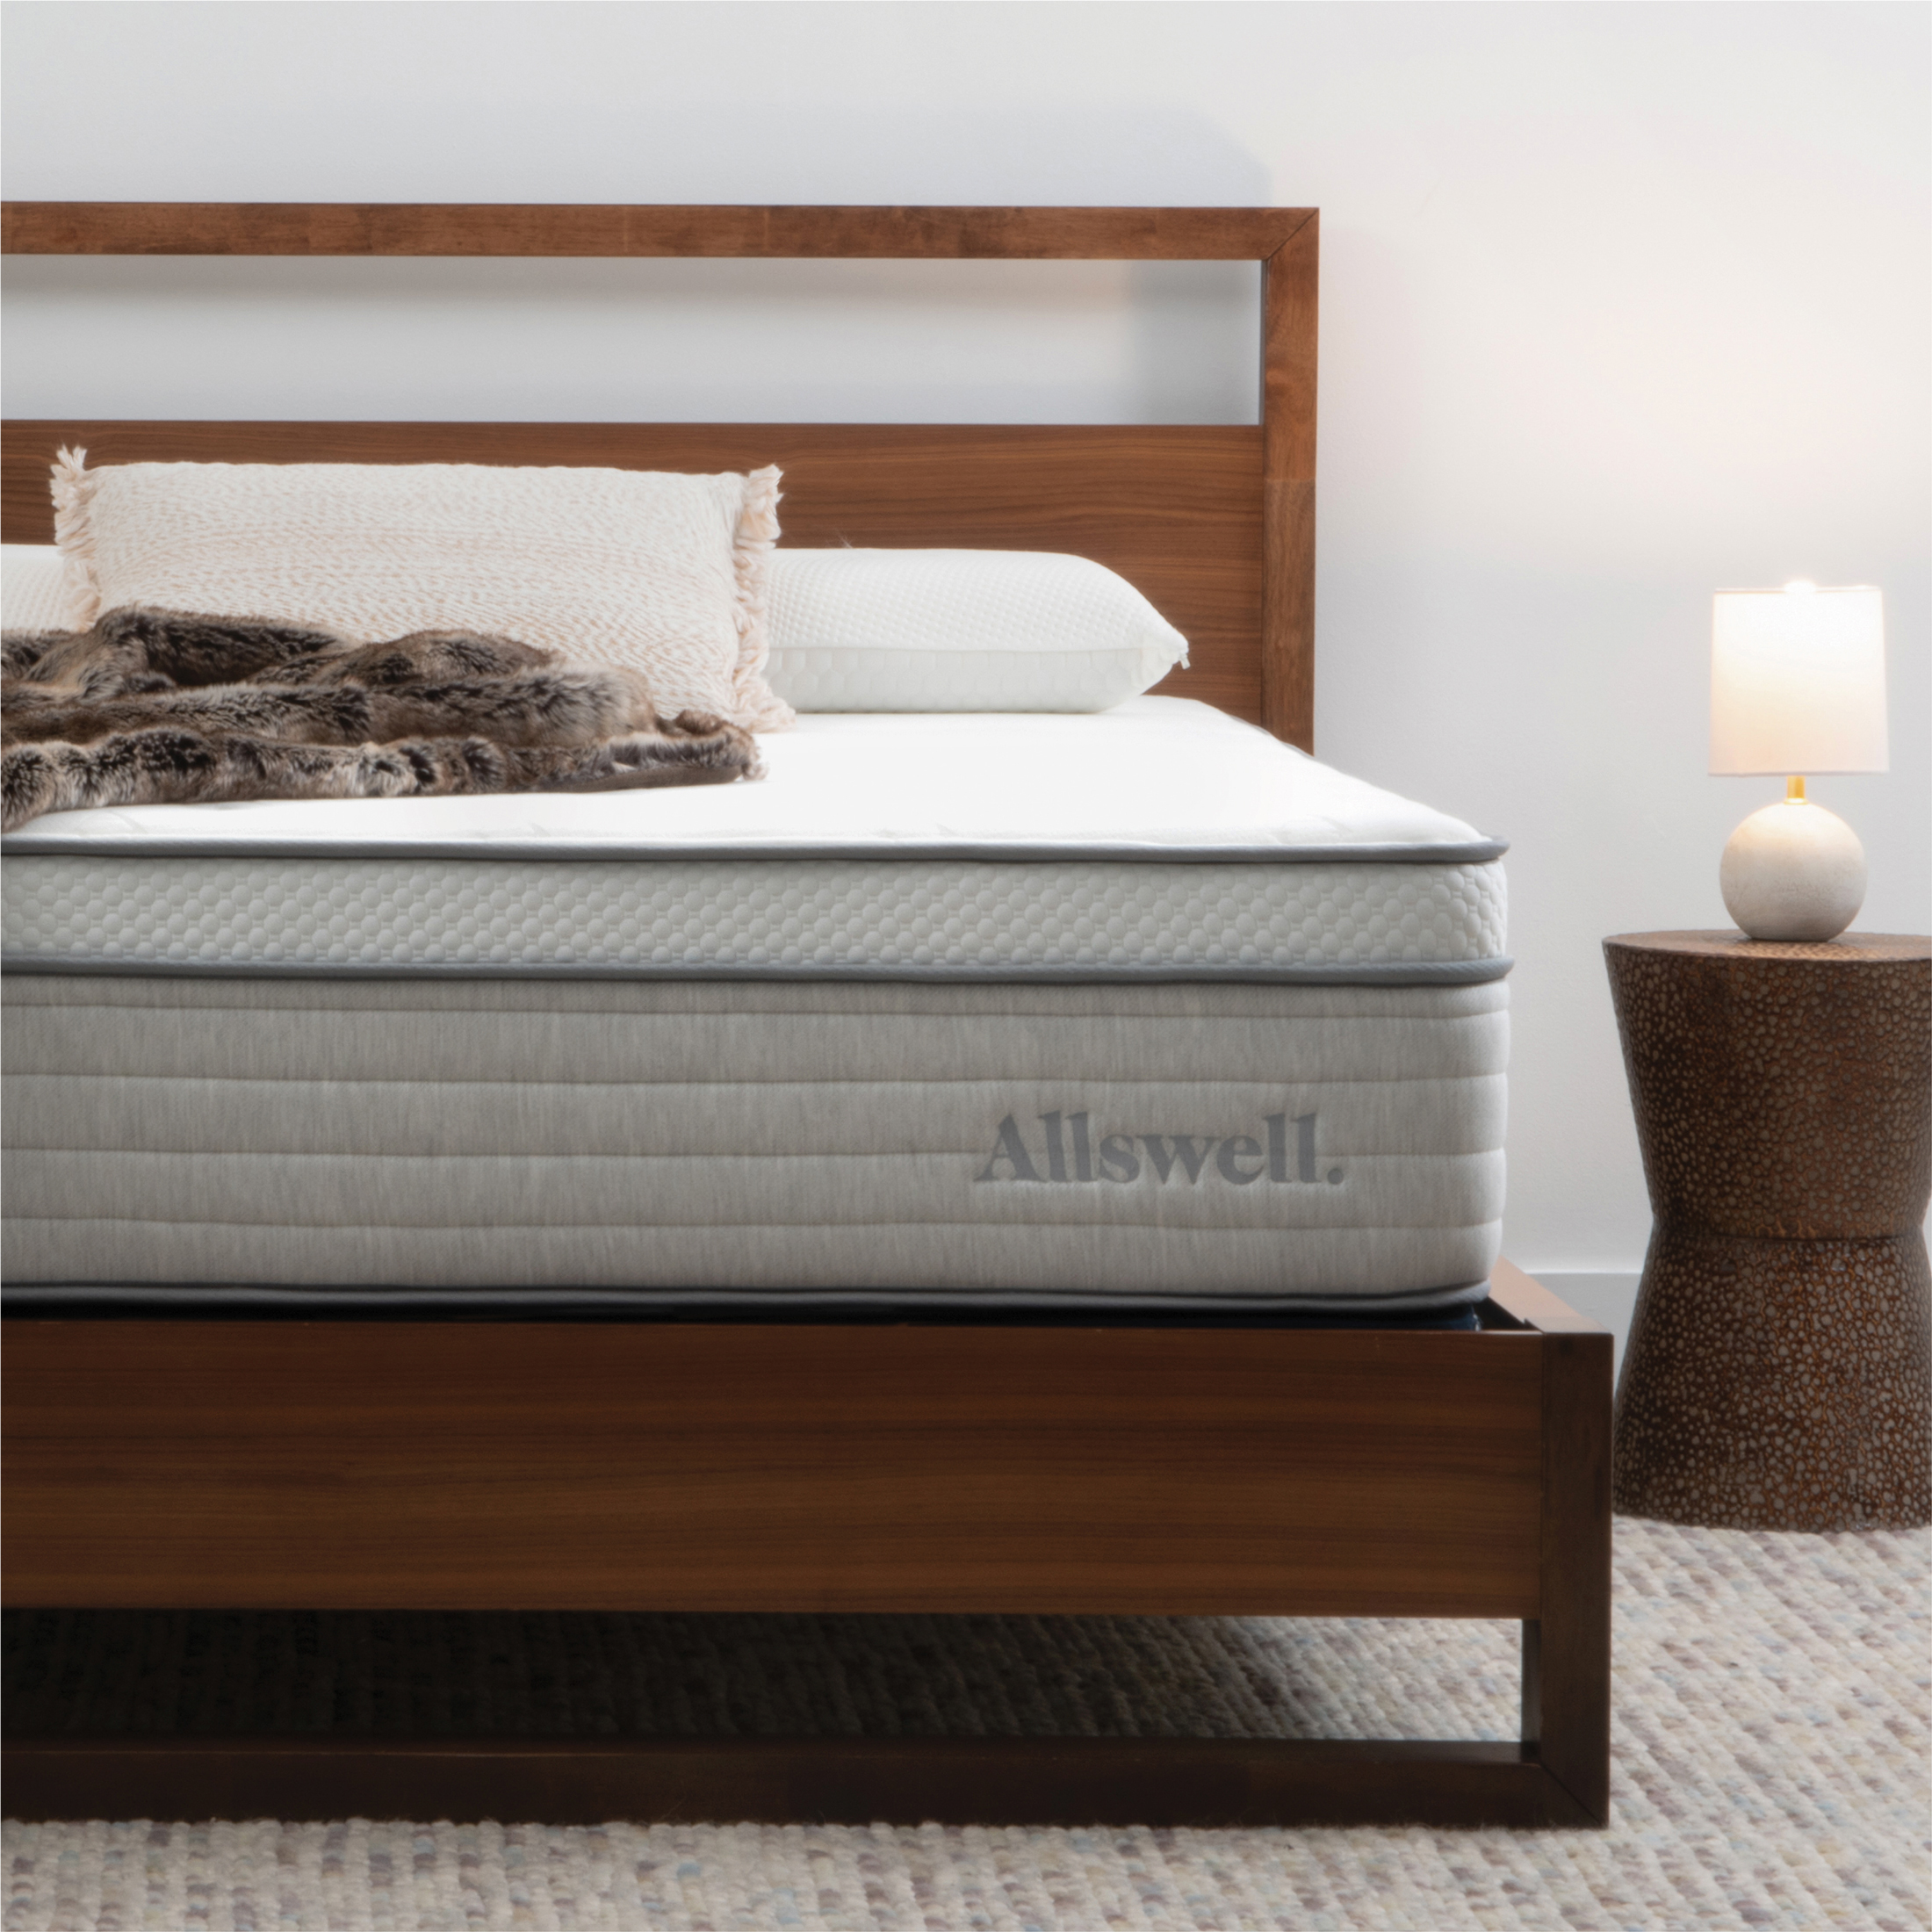 The Allswell Supreme 14" Bed in a Box Hybrid Mattress, Queen - image 2 of 8